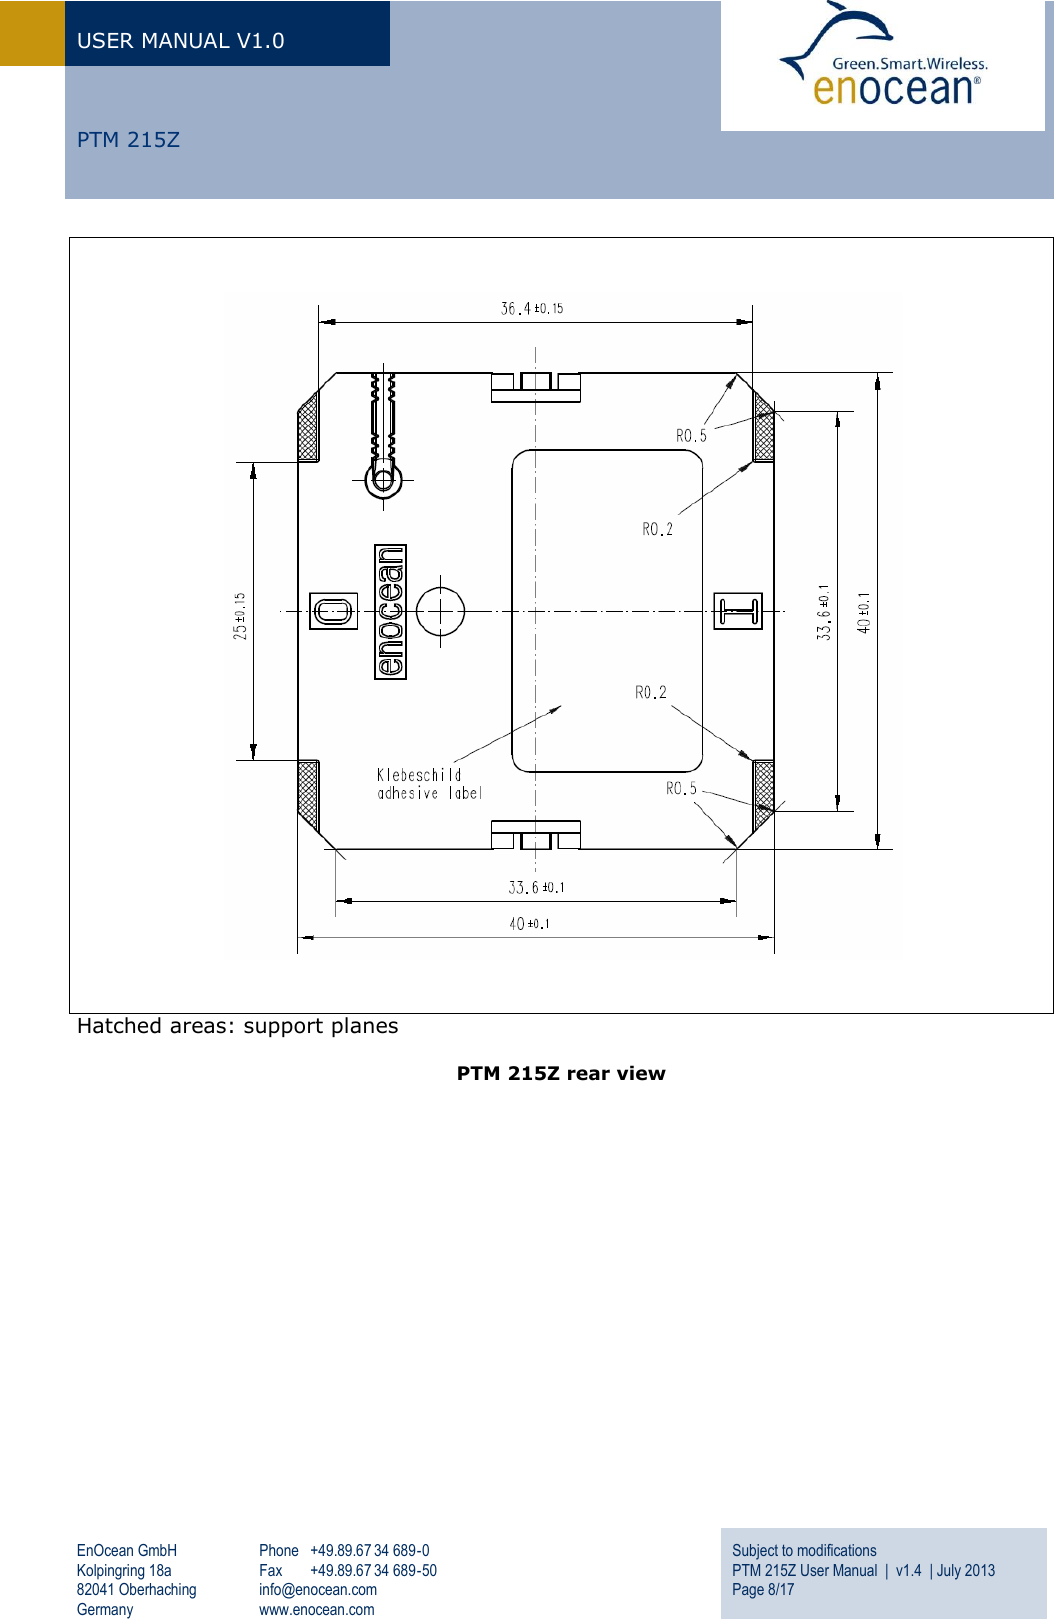 USER MANUAL V1.0   EnOcean GmbH Kolpingring 18a 82041 Oberhaching Germany Phone  +49.89.67 34 689-0 Fax  +49.89.67 34 689-50 info@enocean.com www.enocean.com Subject to modifications PTM 215Z User Manual  |  v1.4  | July 2013 Page 8/17      PTM 215Z    Hatched areas: support planes  PTM 215Z rear view     